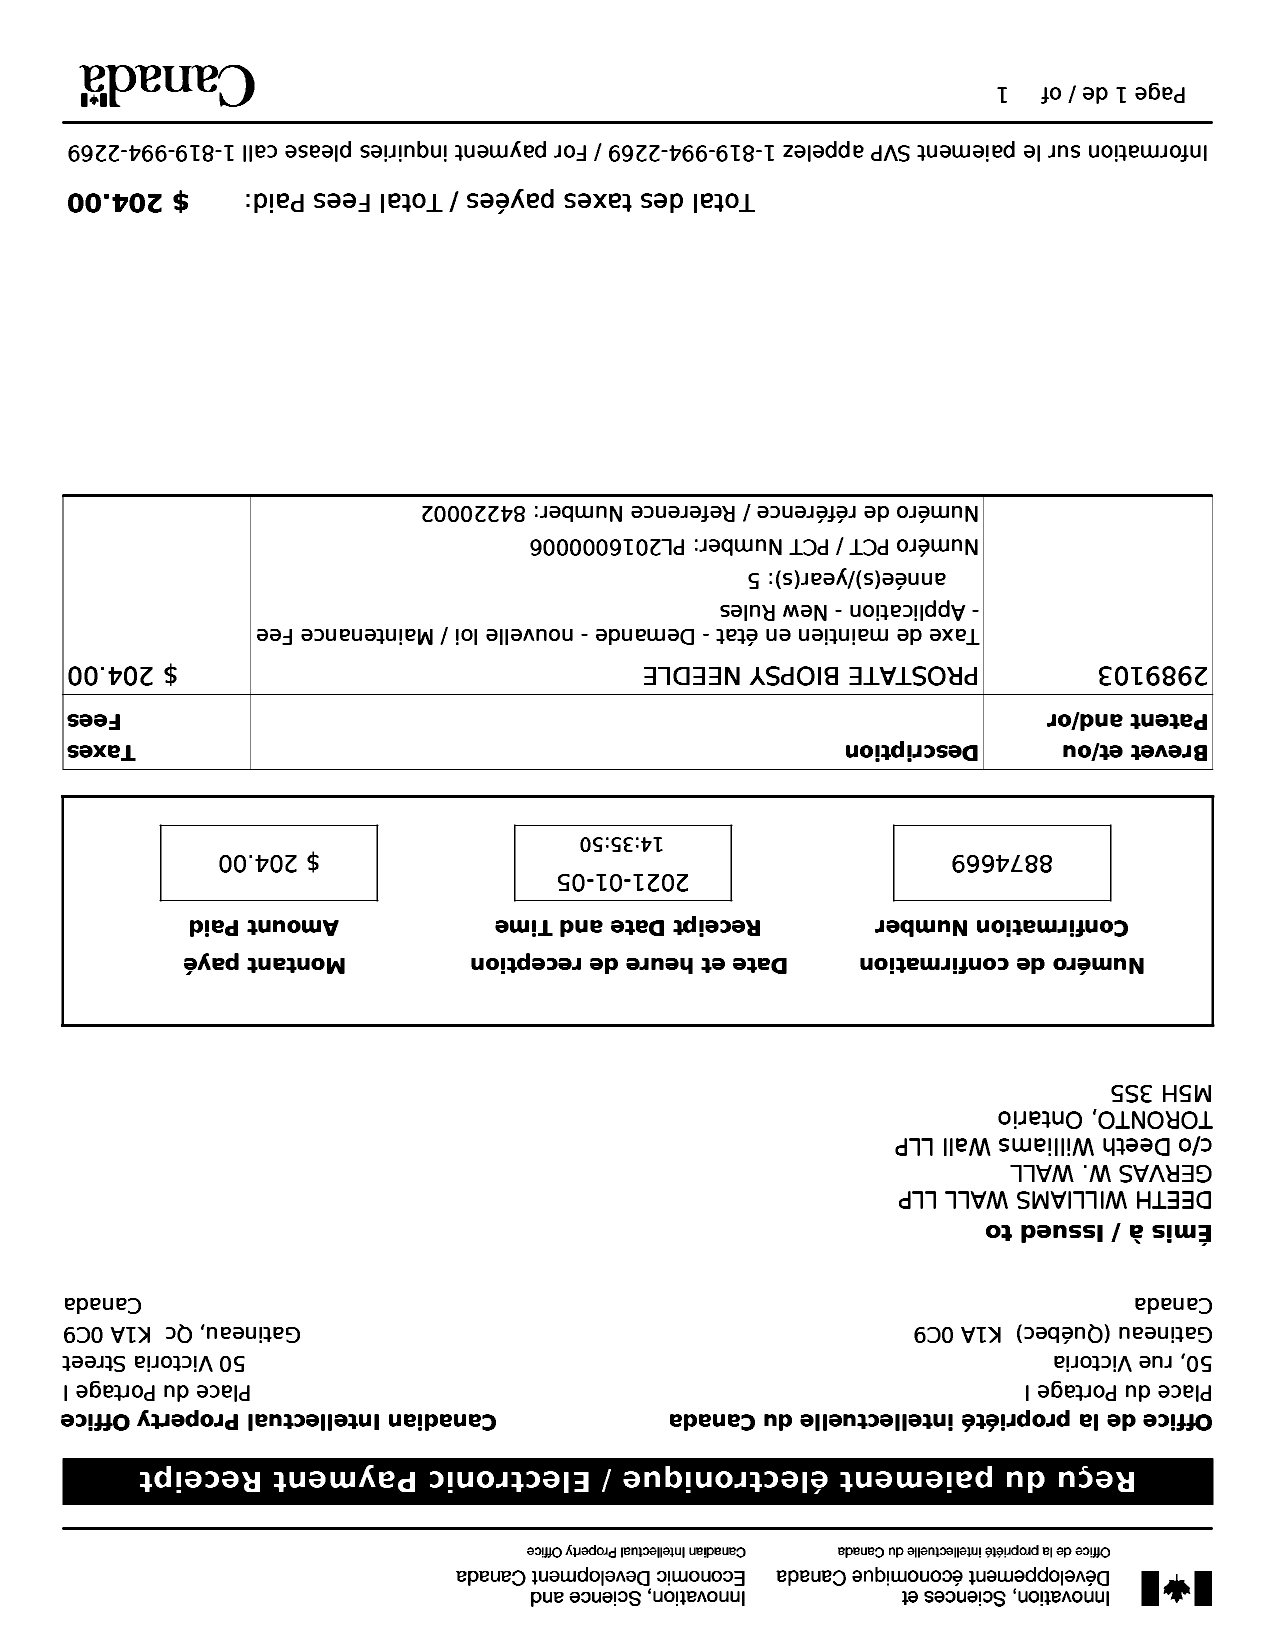 Canadian Patent Document 2989103. Maintenance Fee Payment 20210105. Image 1 of 1